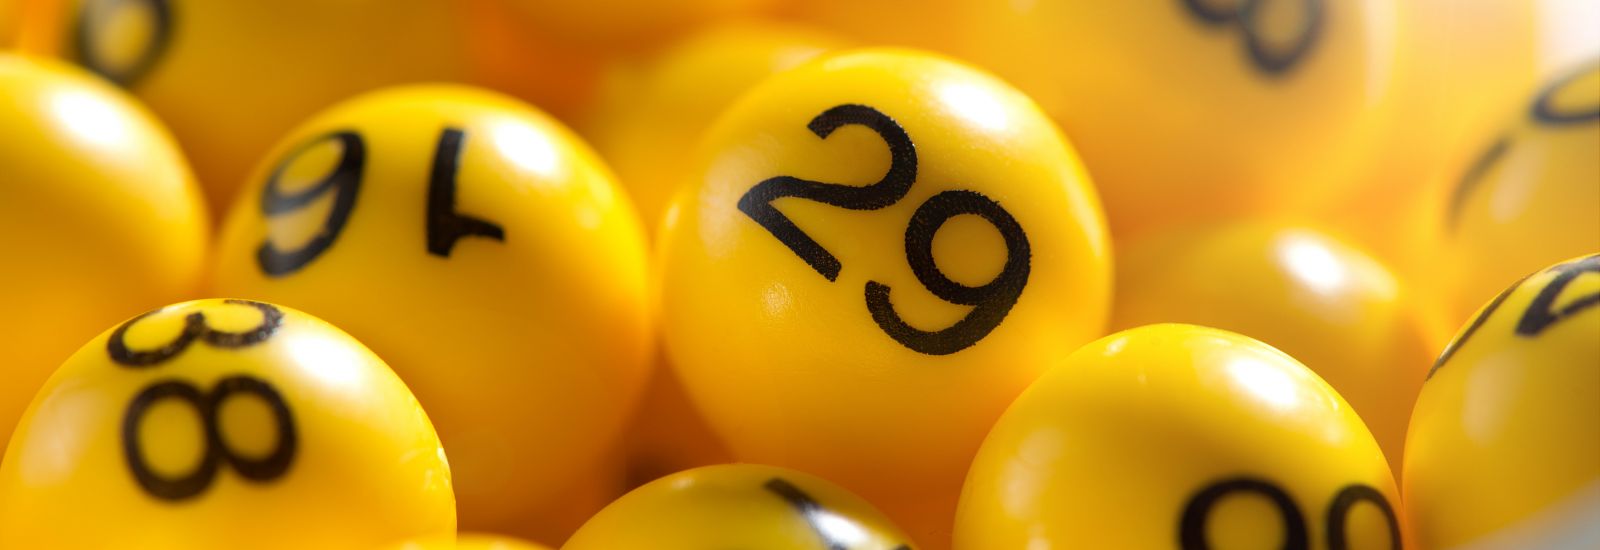 Background of yellow balls with bingo numbers used to randomly select lucky numbers during a bingo game